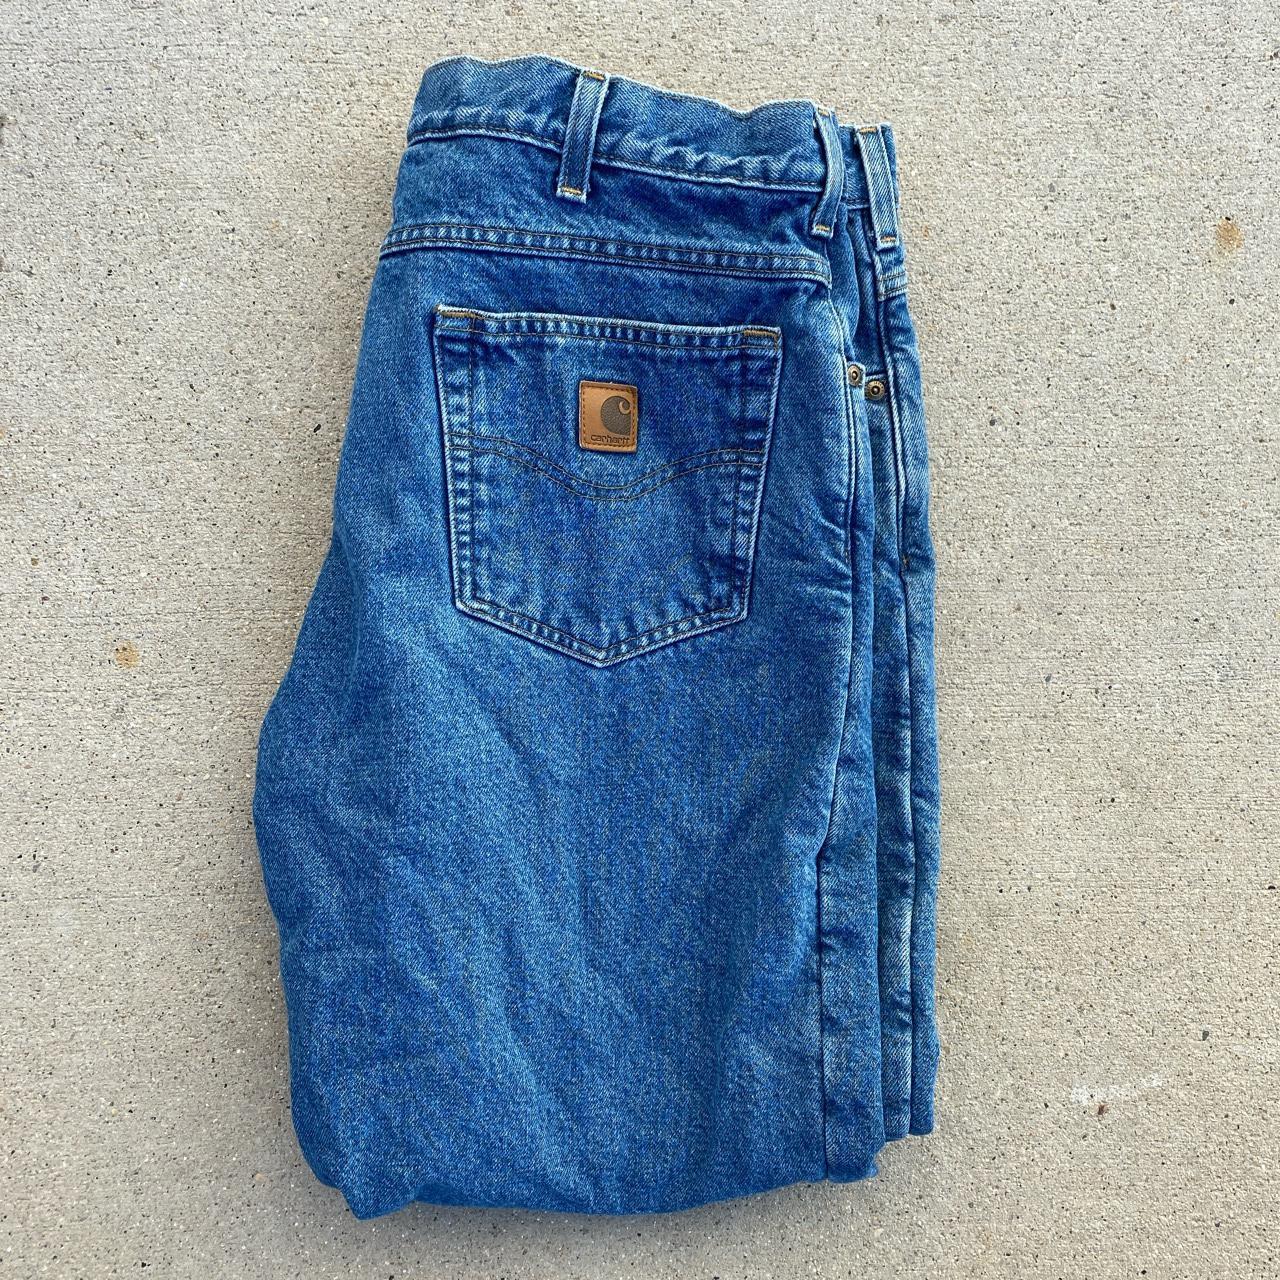 men’s denim carhartt pants ‼️THERE IS NO SIZE ON THE... - Depop